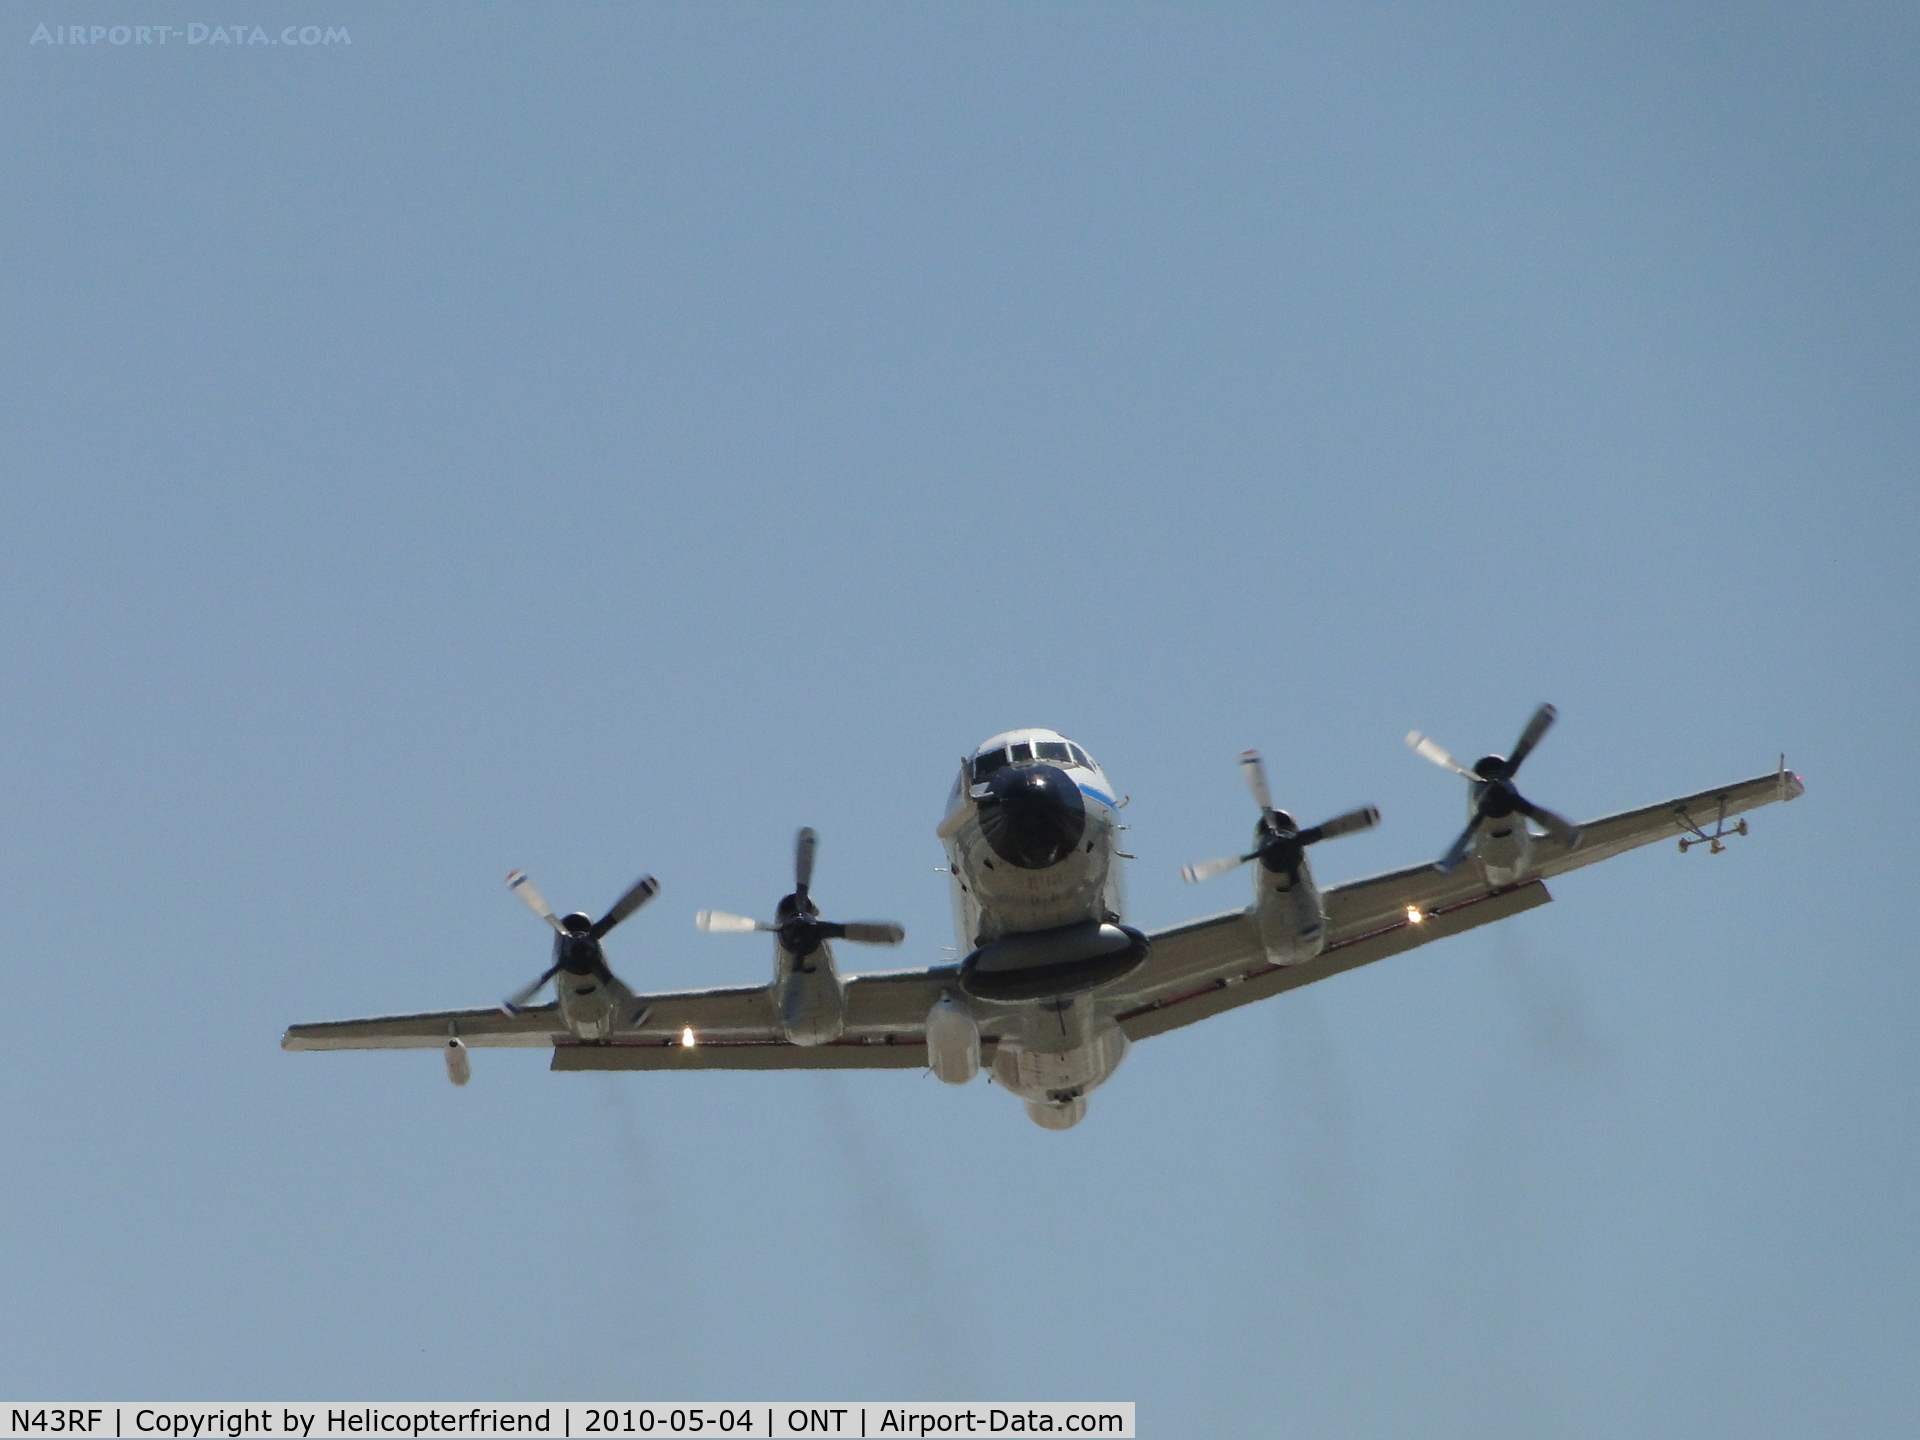 N43RF, Lockheed WP-3D Orion C/N 285A-5633, Appears to be smiling after lifting off from runway 26L